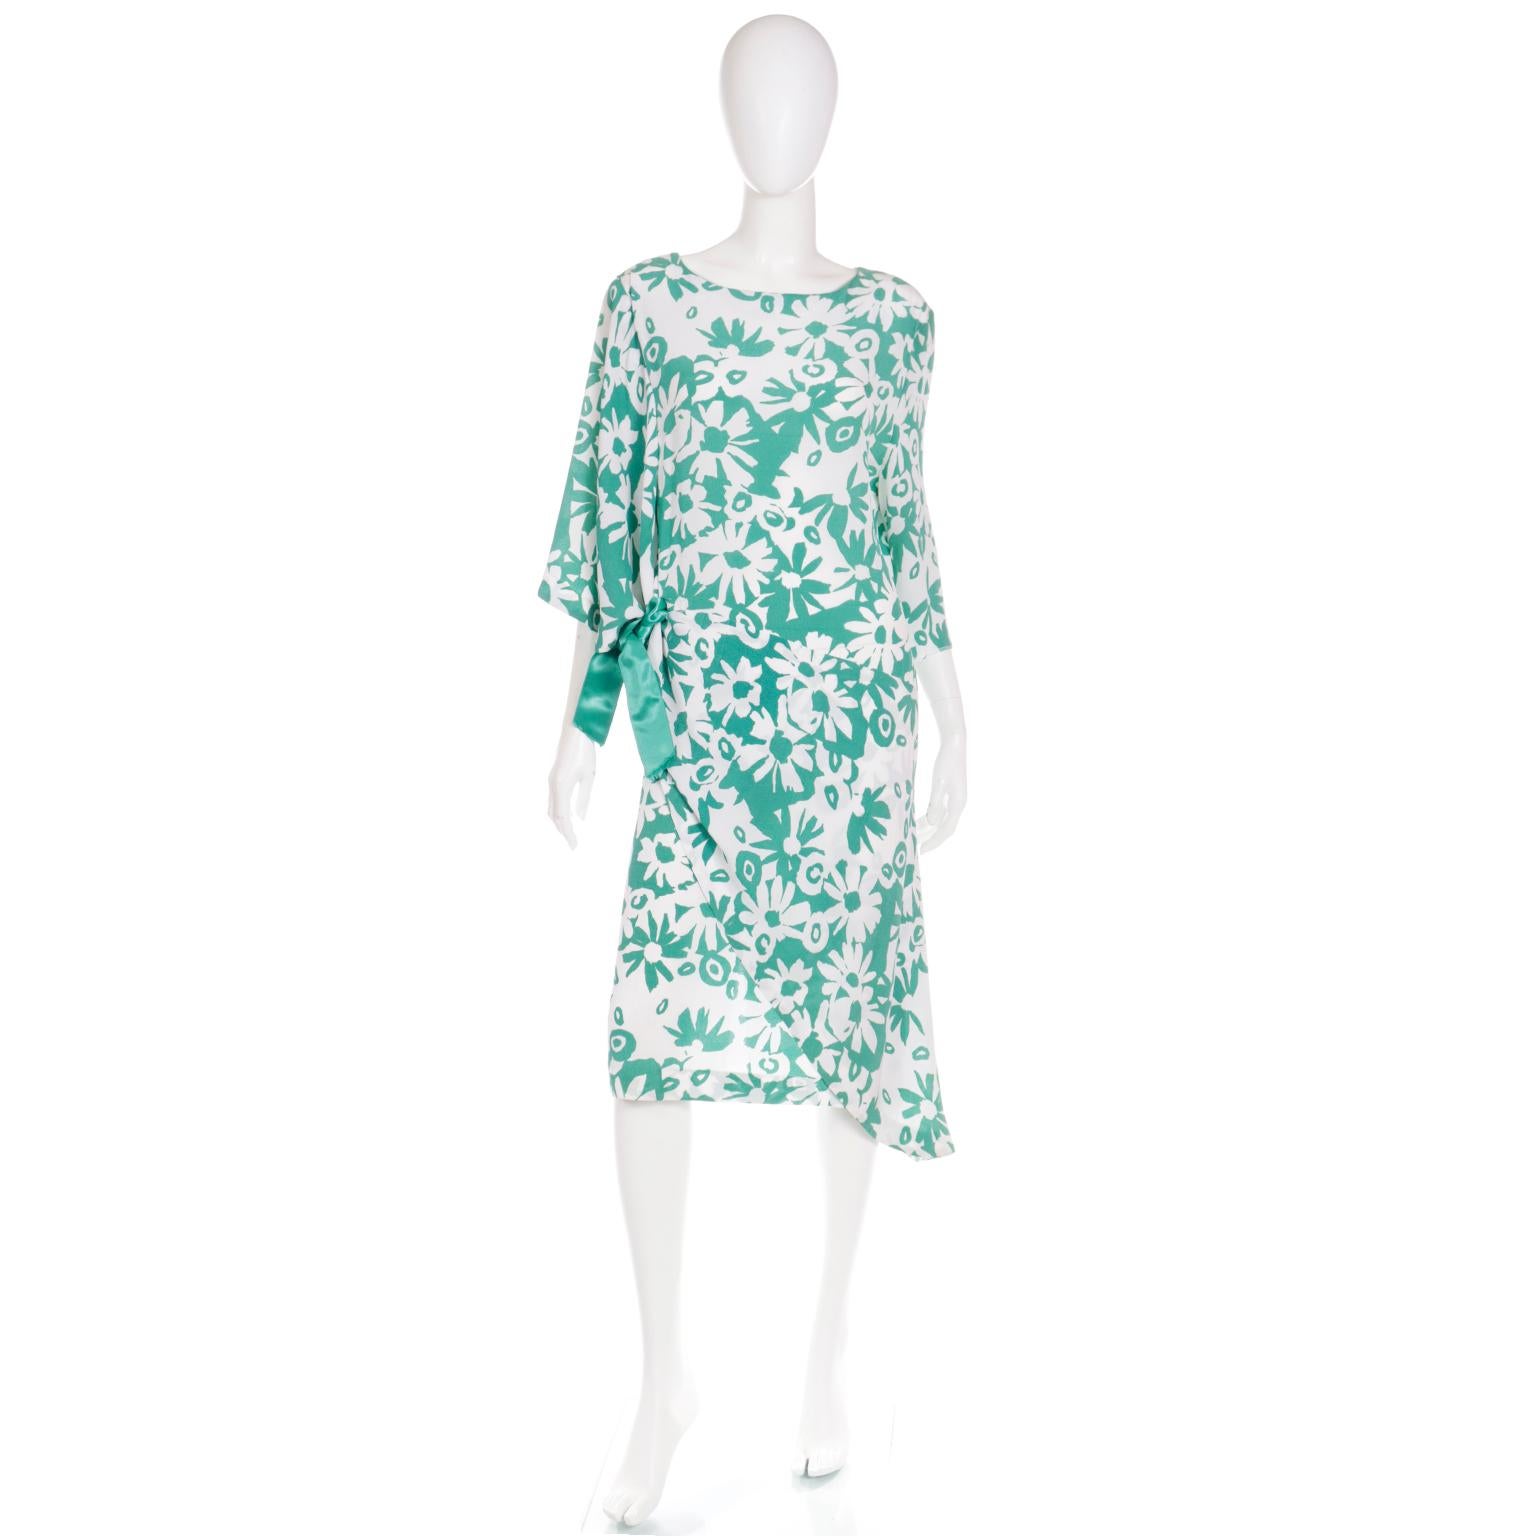 This pretty Creation Pierre Cardin Paris vintage dress is in a bold green and white floral print and it has incredible style details. This 1920's inspired day or evening dress has an asymmetrical silhouette with a tie at the side featuring a green